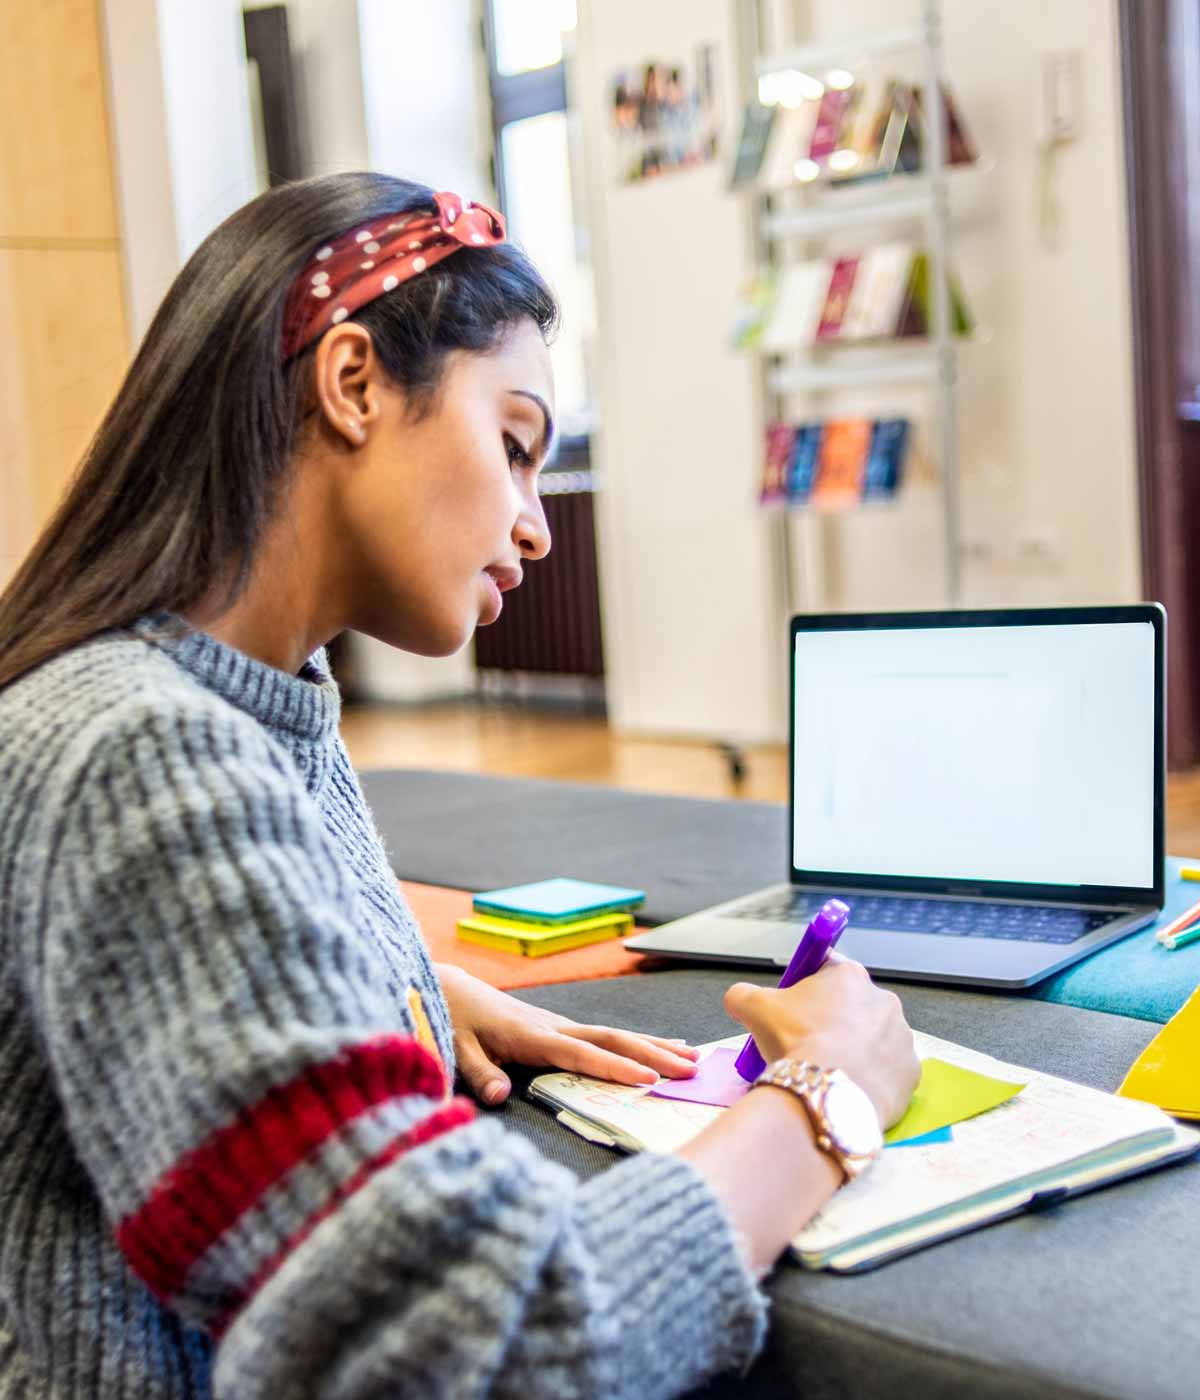 Female international student in a gray woolen sweater and red headband writing sticky notes with her laptop open at a table